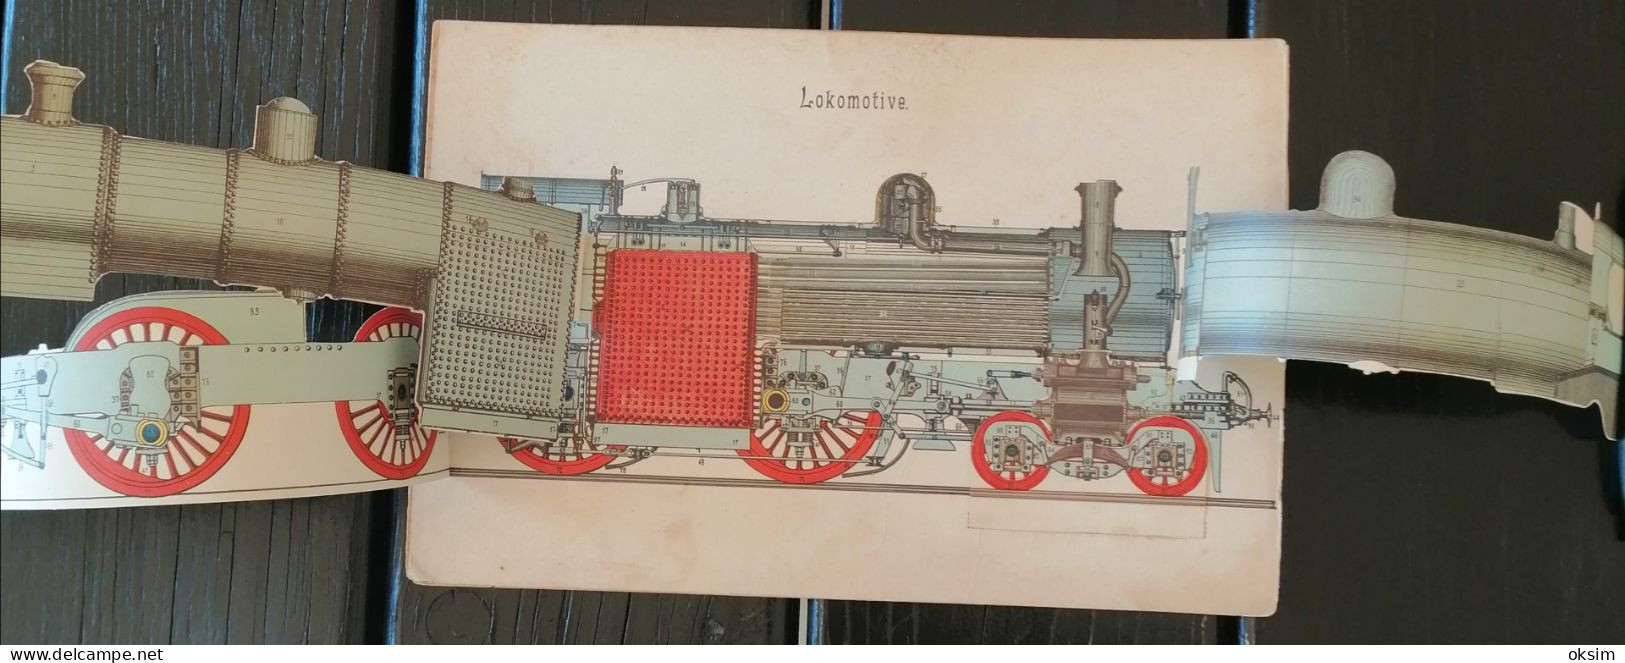 Drawings Of Machinery In Colour, Consisting Of Several Layers That Can Be Unfolded To Show The Interior Of The Machines - Máquinas